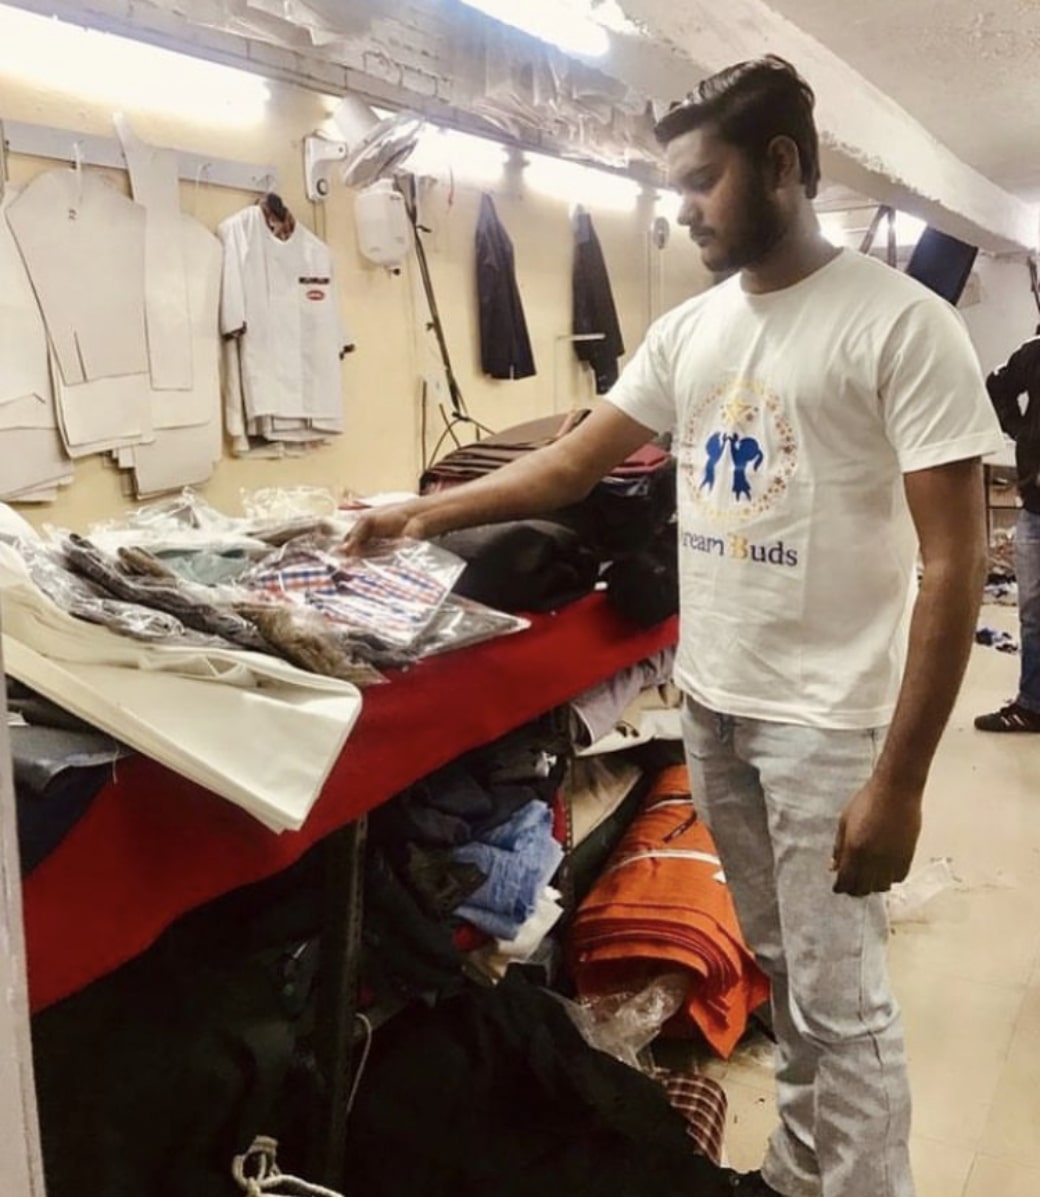 Providing stitched clothes for physically and mentally challenged